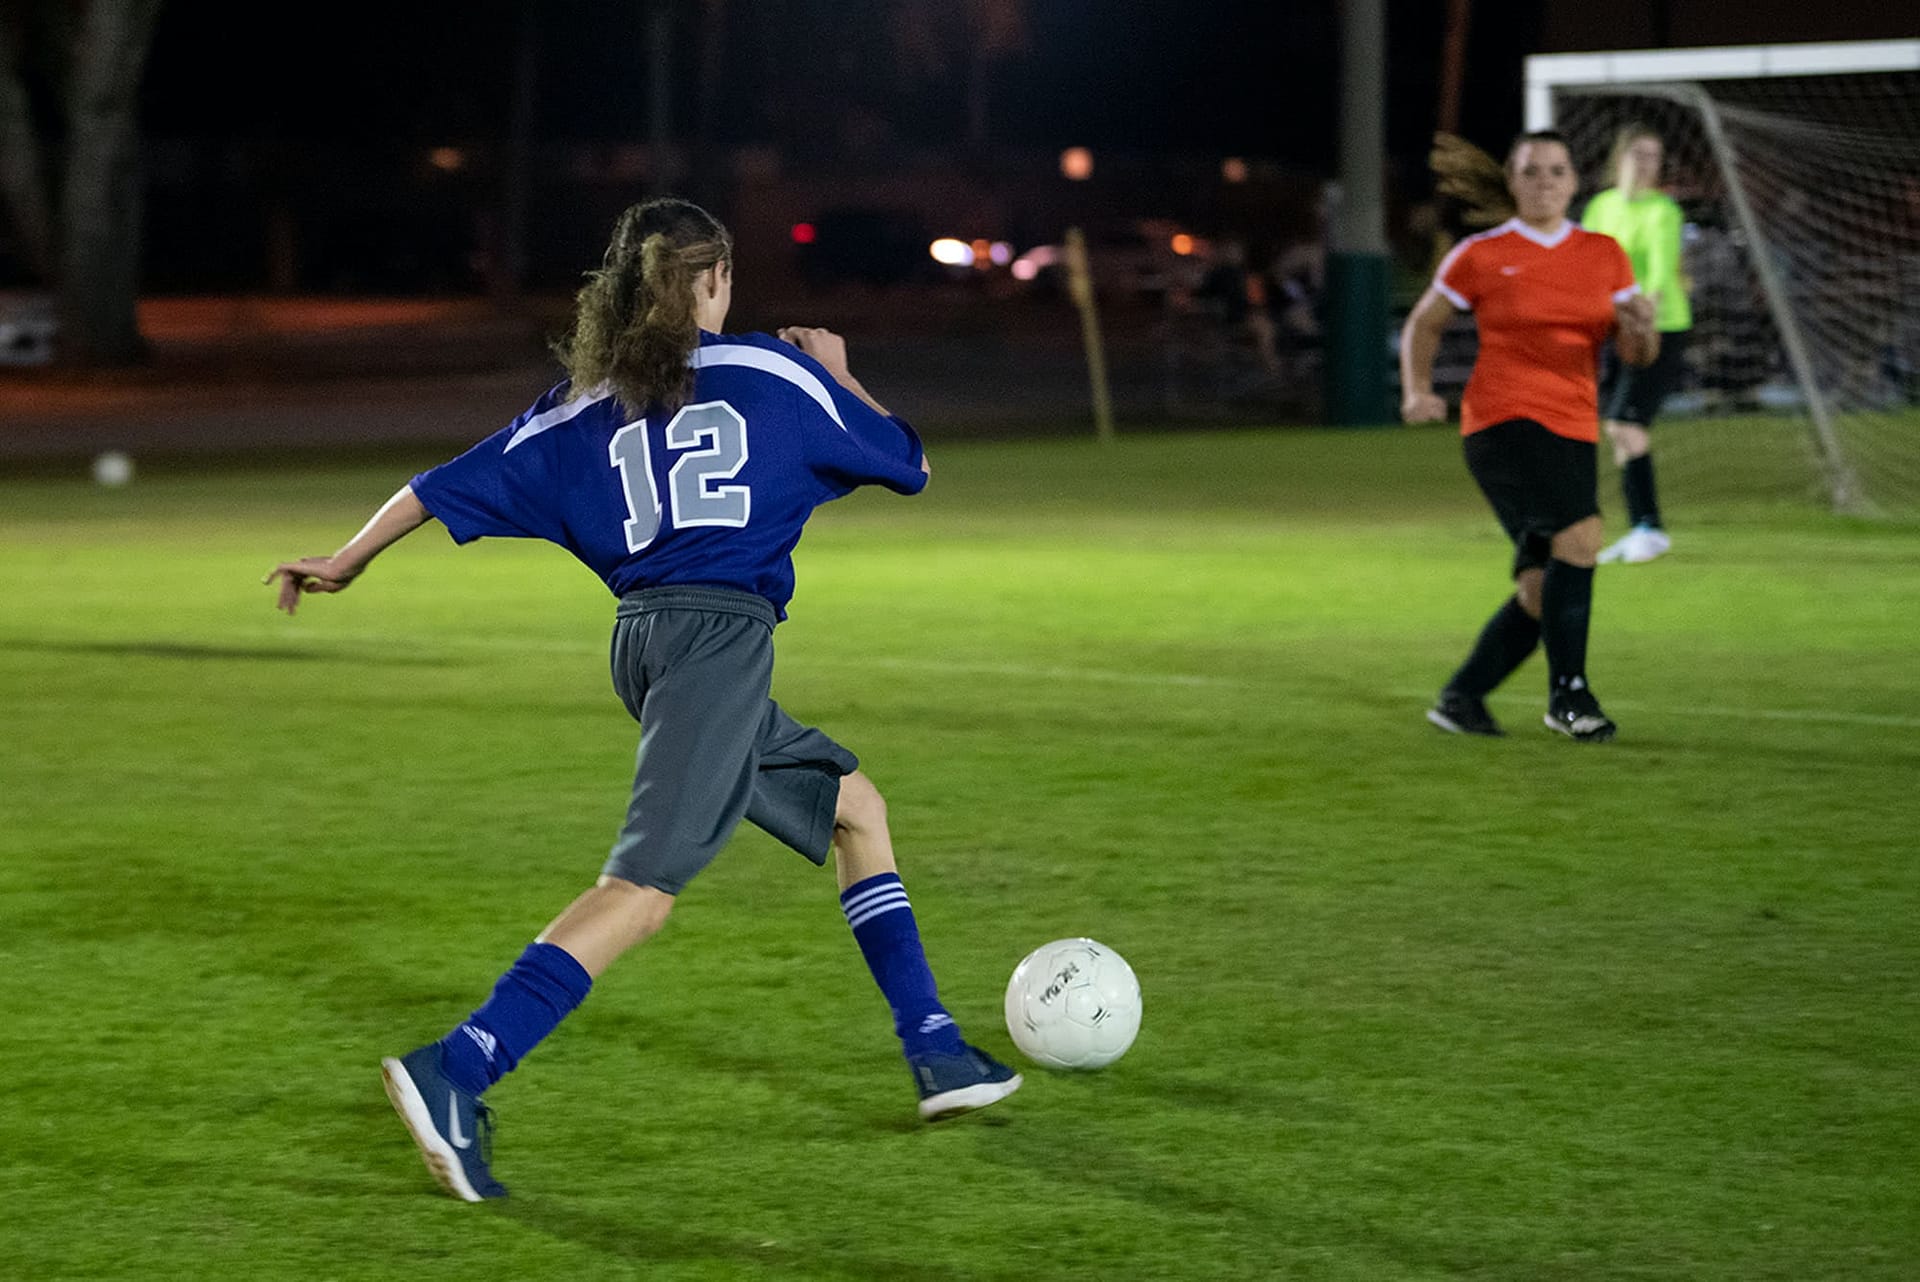 Women's collegian soccer player aiming to kick a soccer ball into the goal. 